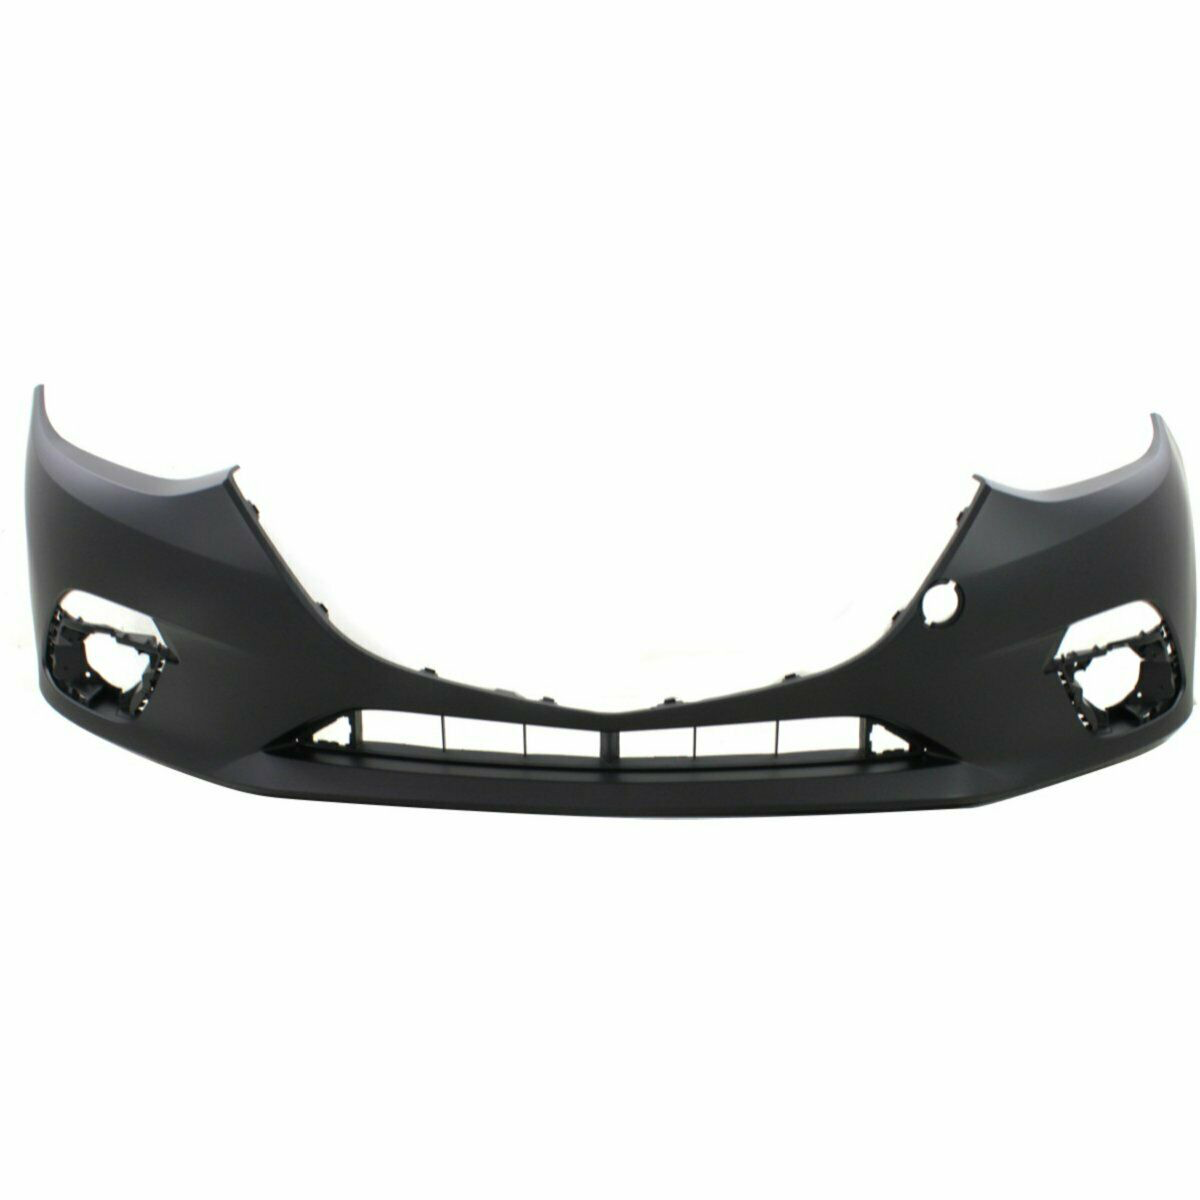 2014-2016 Mazda 3 Hatchback Front Bumper Painted to Match